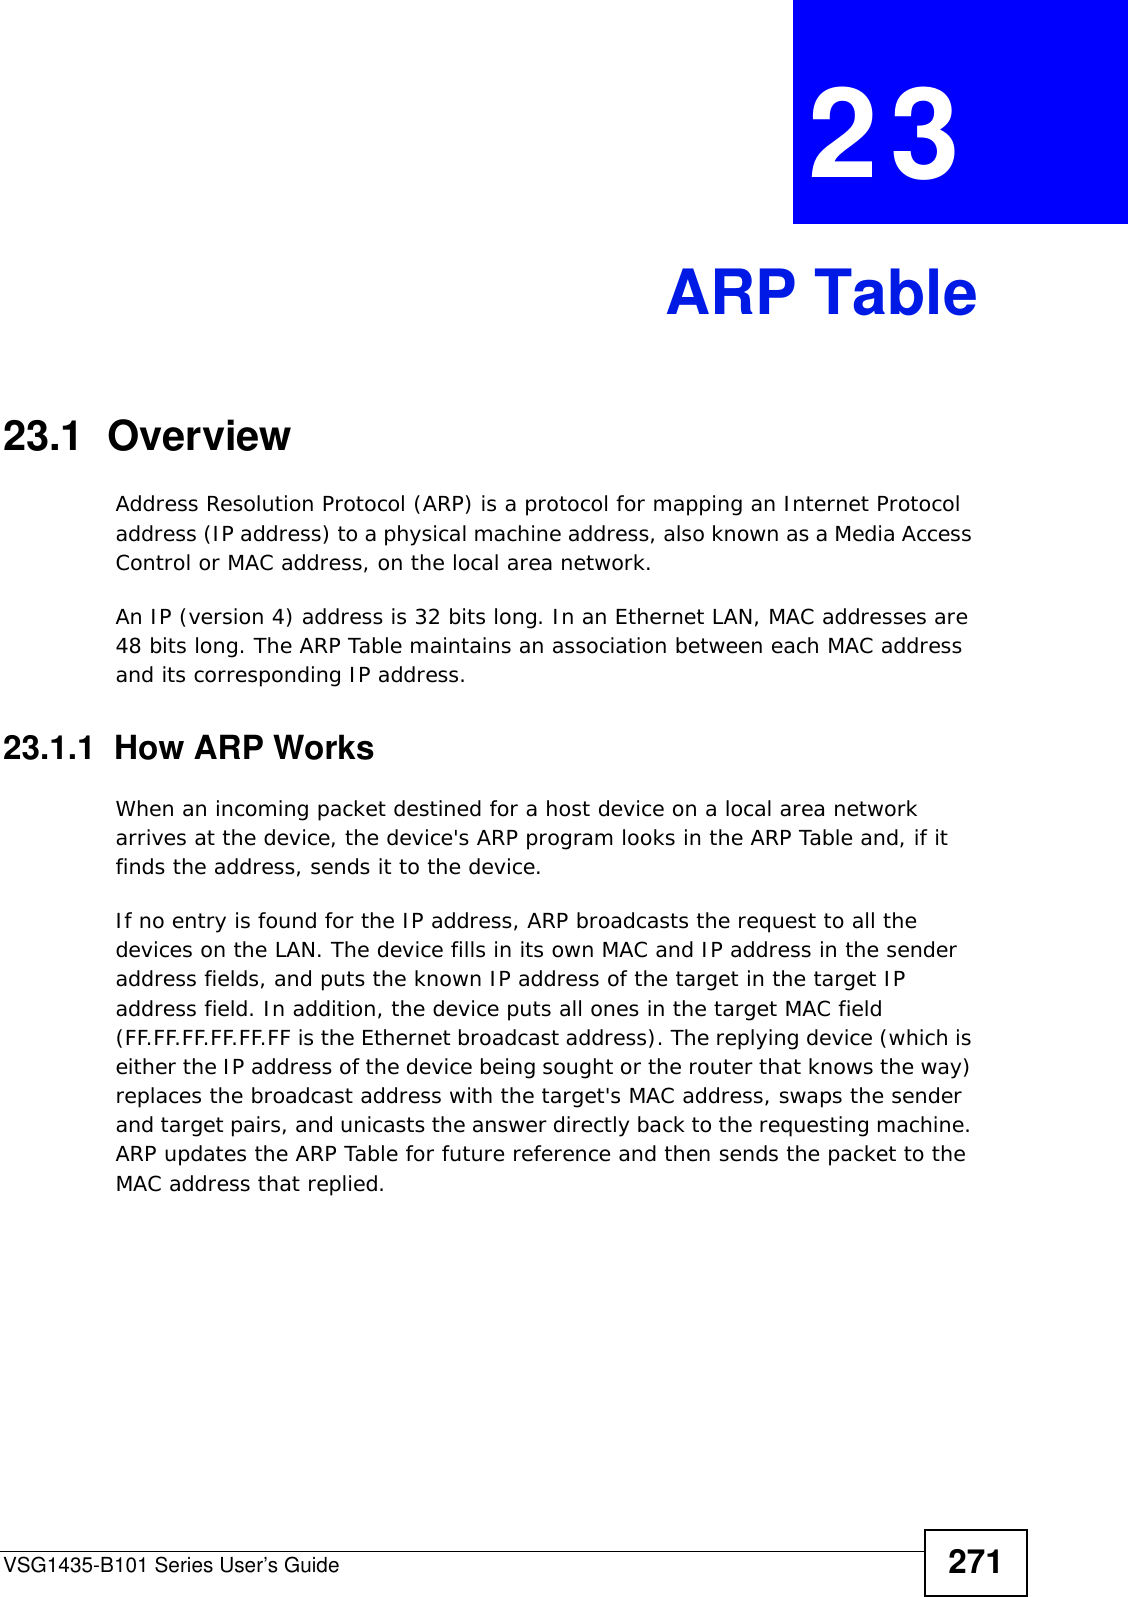 VSG1435-B101 Series User’s Guide 271CHAPTER  23 ARP Table23.1  OverviewAddress Resolution Protocol (ARP) is a protocol for mapping an Internet Protocol address (IP address) to a physical machine address, also known as a Media Access Control or MAC address, on the local area network. An IP (version 4) address is 32 bits long. In an Ethernet LAN, MAC addresses are 48 bits long. The ARP Table maintains an association between each MAC address and its corresponding IP address. 23.1.1  How ARP WorksWhen an incoming packet destined for a host device on a local area network arrives at the device, the device&apos;s ARP program looks in the ARP Table and, if it finds the address, sends it to the device.If no entry is found for the IP address, ARP broadcasts the request to all the devices on the LAN. The device fills in its own MAC and IP address in the sender address fields, and puts the known IP address of the target in the target IP address field. In addition, the device puts all ones in the target MAC field (FF.FF.FF.FF.FF.FF is the Ethernet broadcast address). The replying device (which is either the IP address of the device being sought or the router that knows the way) replaces the broadcast address with the target&apos;s MAC address, swaps the sender and target pairs, and unicasts the answer directly back to the requesting machine. ARP updates the ARP Table for future reference and then sends the packet to the MAC address that replied. 